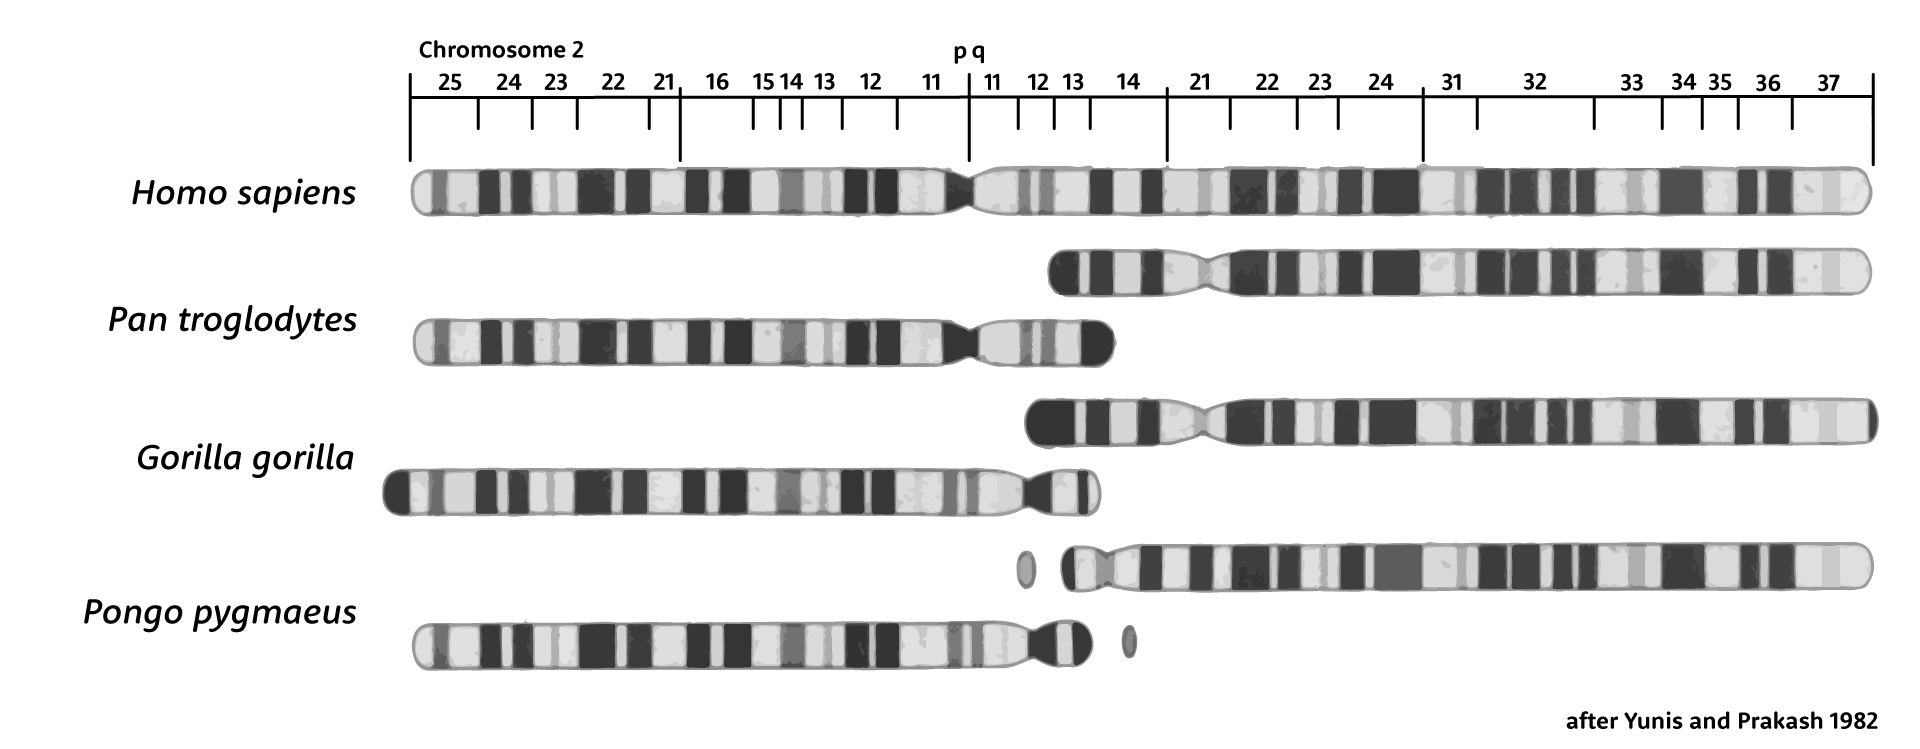 Ideogram of human chromosome 2, above the ideograms of chimpanzee, gorilla, and orangutan chromosomes that are homologous with the p and q arms of human chromosome 2. 